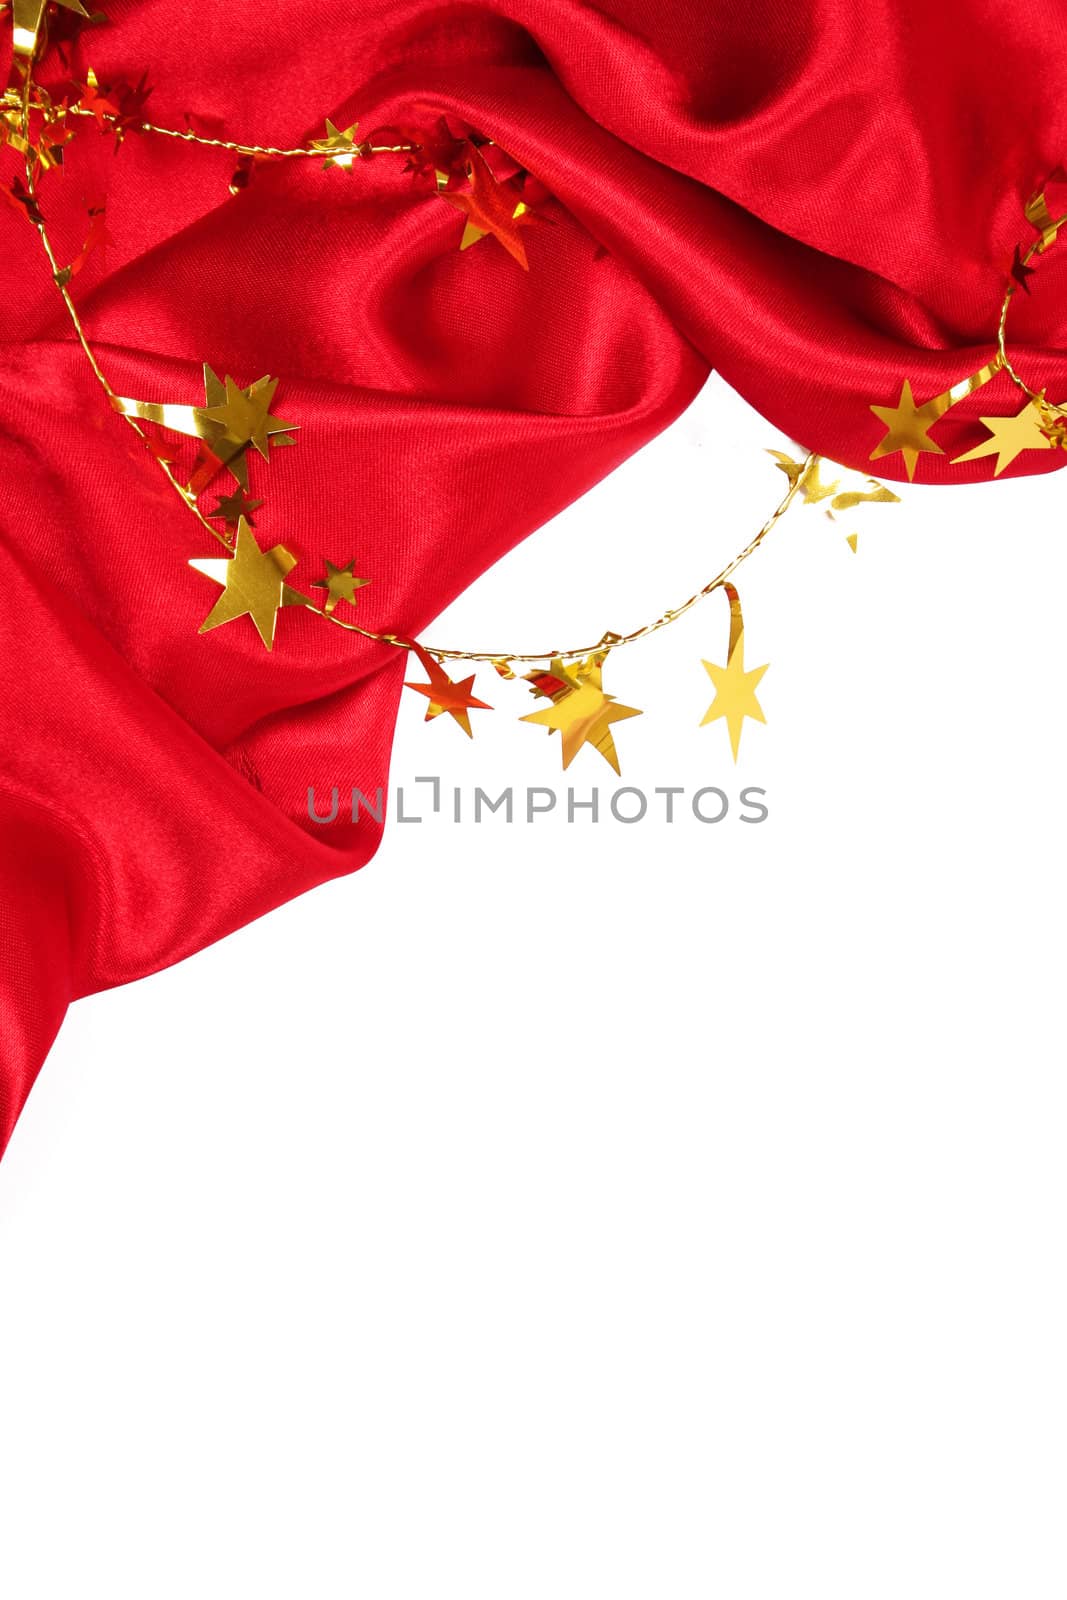 Smooth Red Silk with golden stars as holiday background